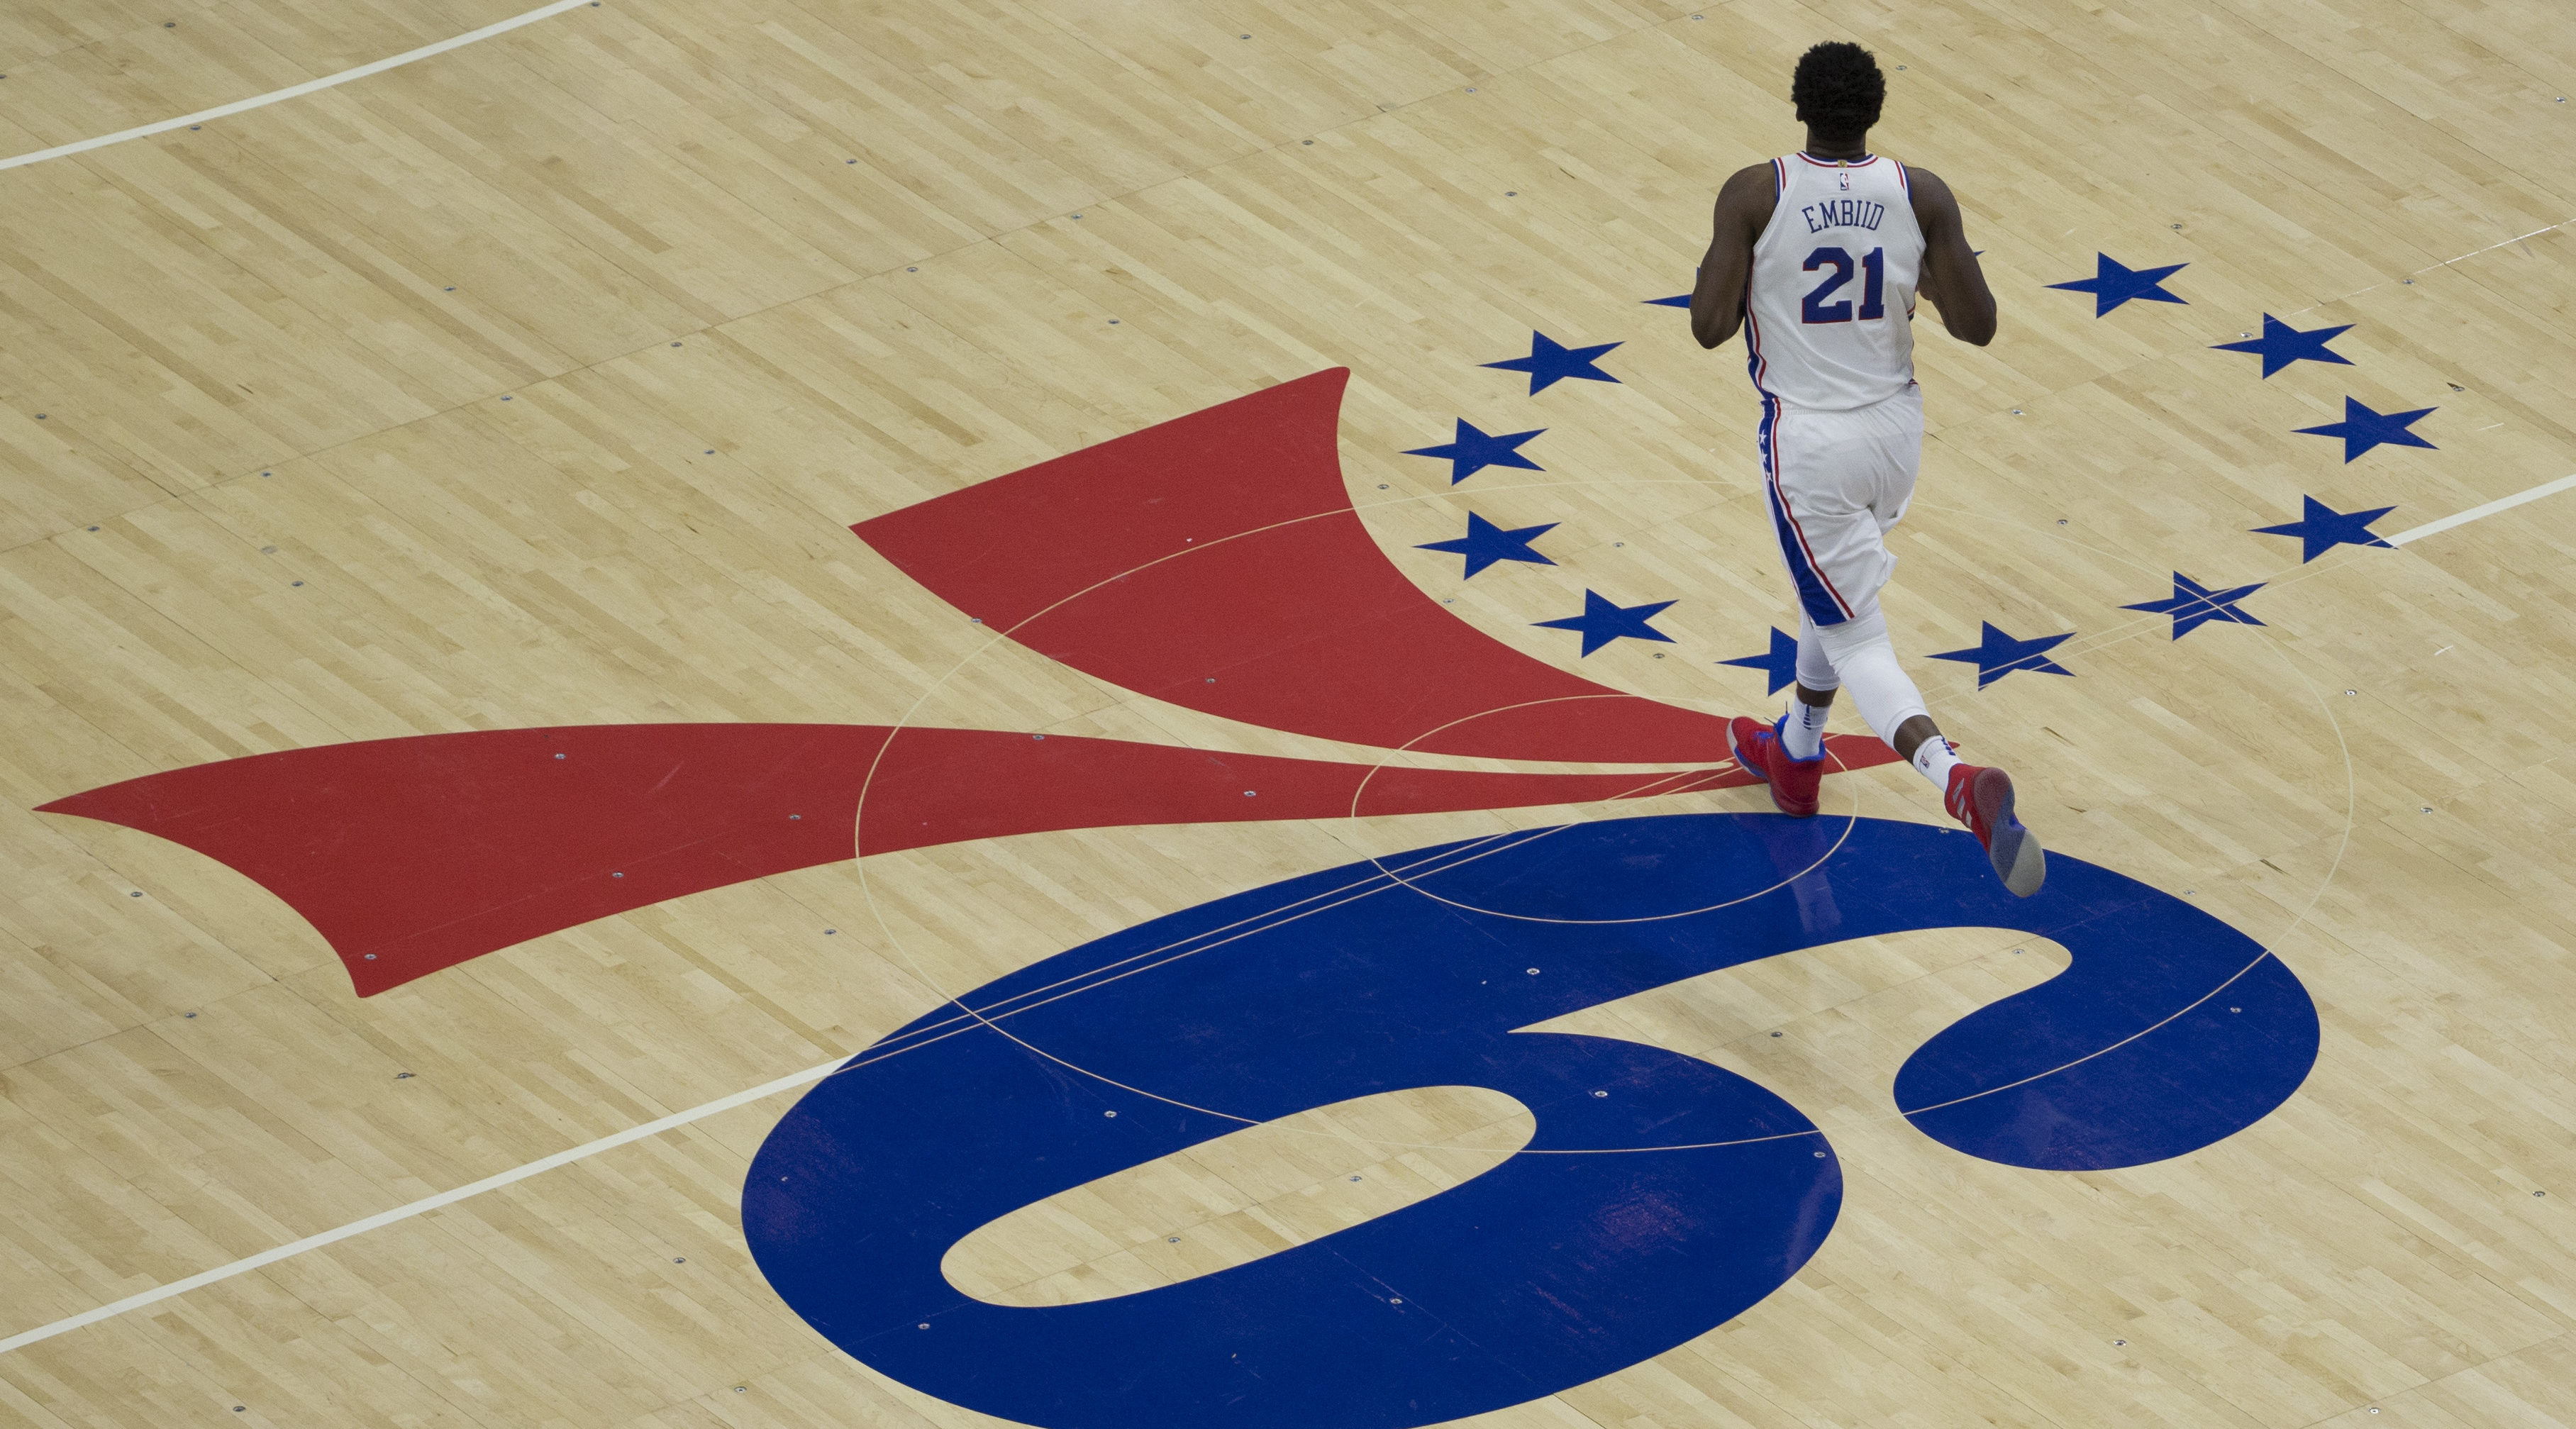 76ers' jersey sponsorship with Crypto.com includes NFT release